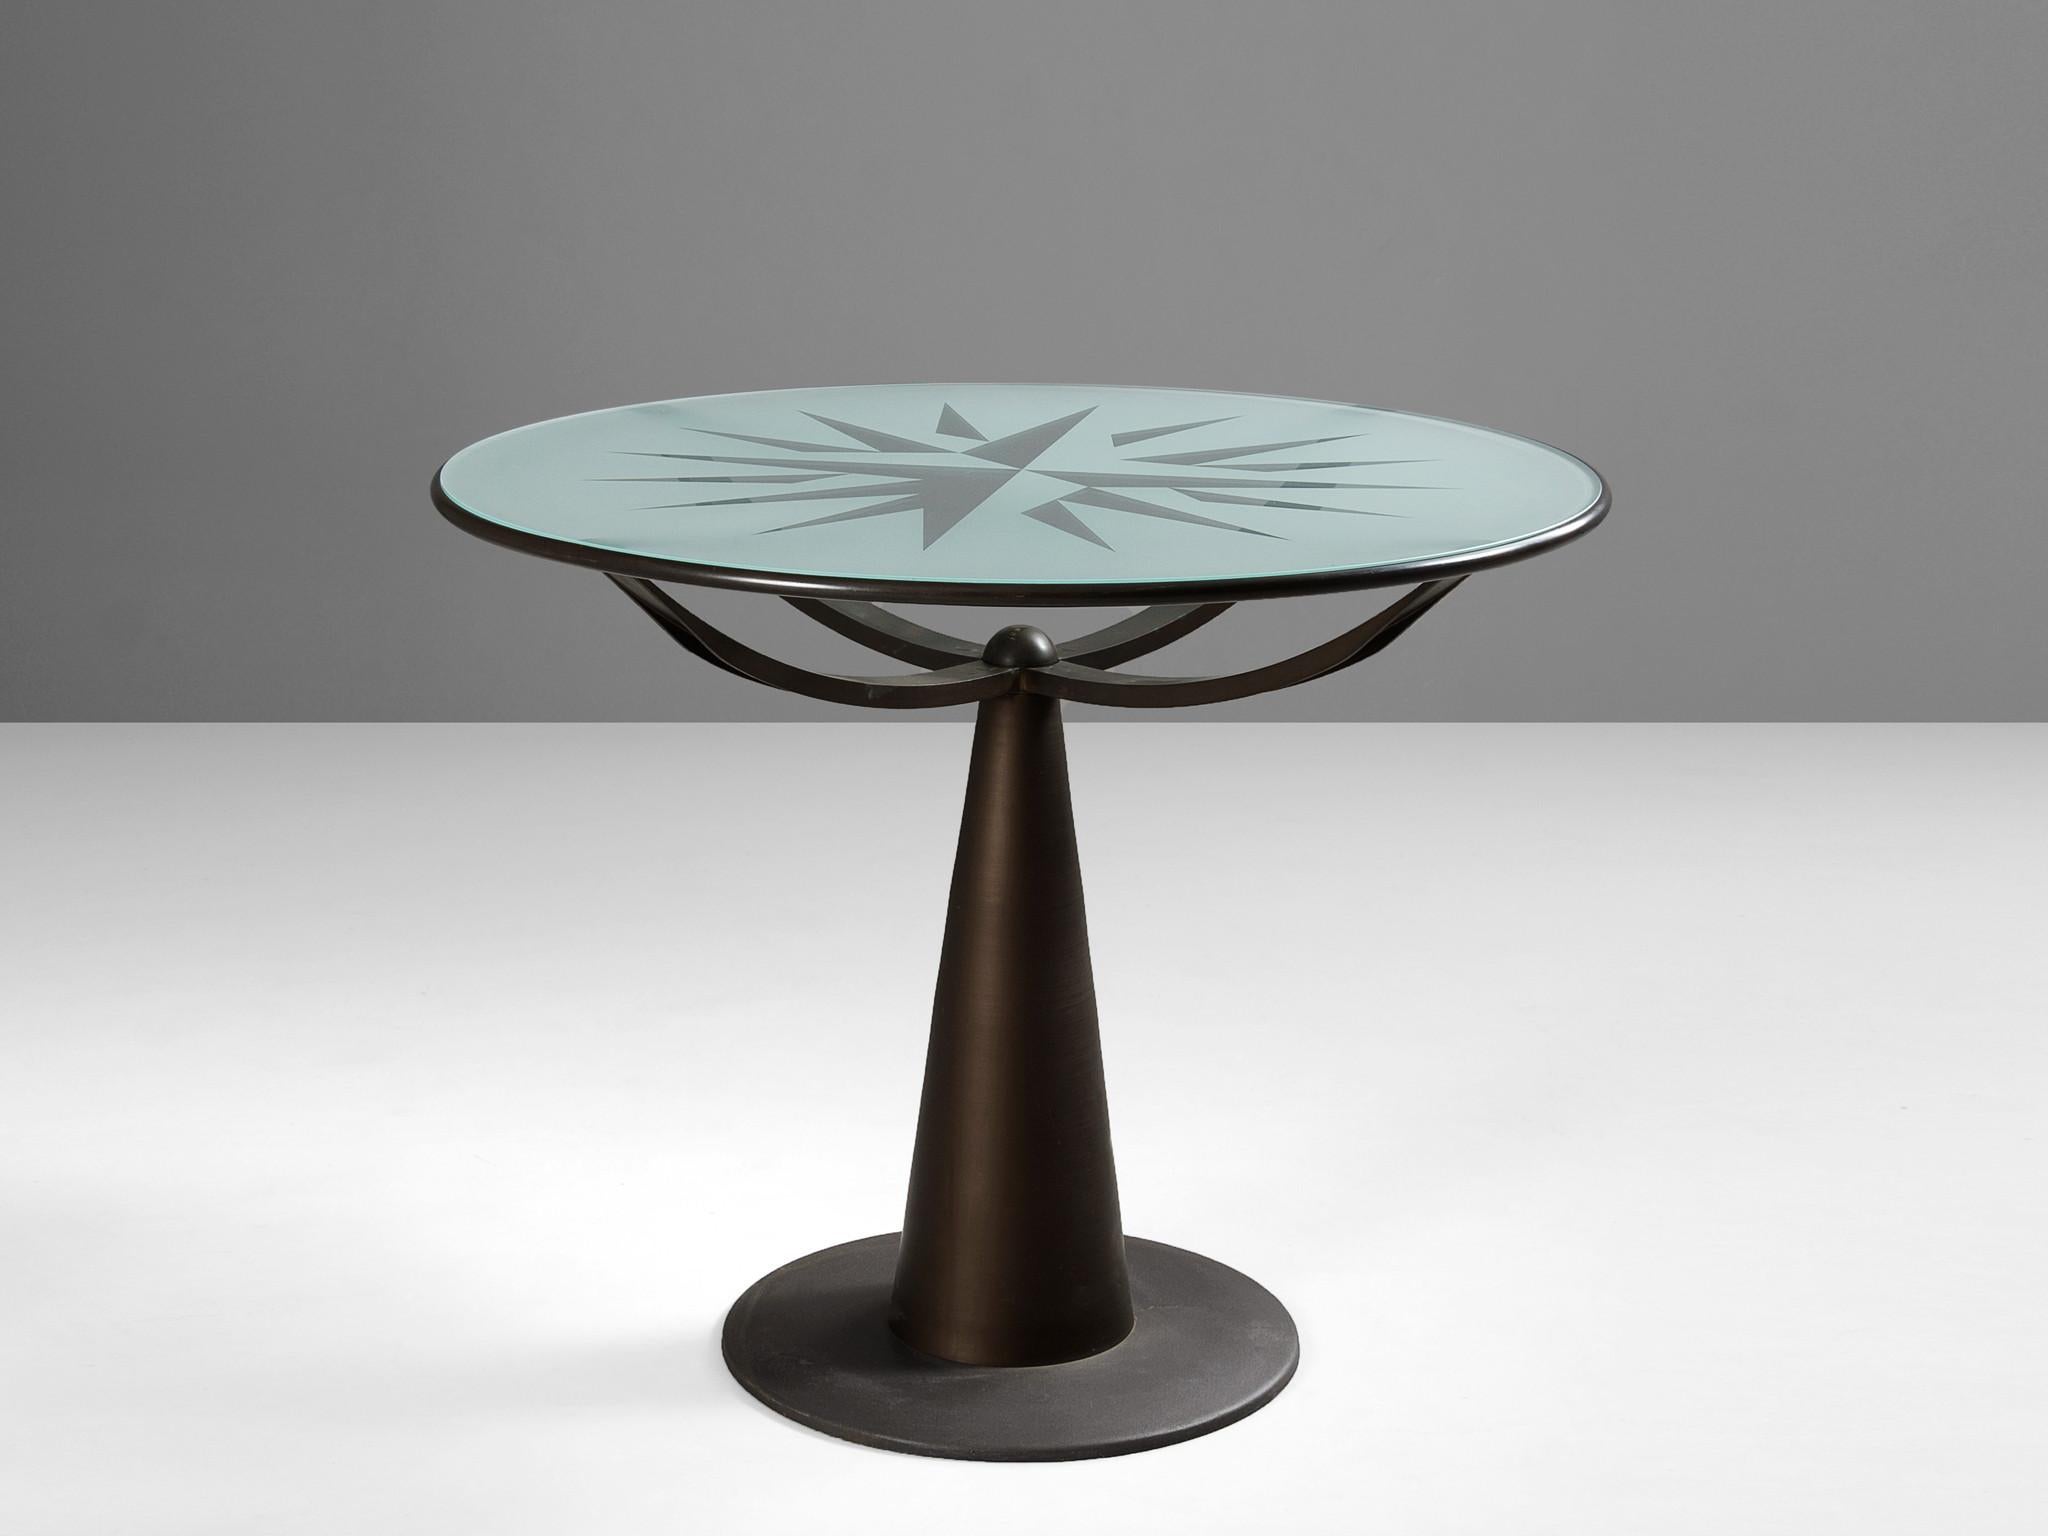 Oscar Tusquets for Driade, side table model ‘Astrolabio’, aluminum, brass, glass, Spain, 1988

Spanish designer Oscar Tusquets named his design ‘Astrolabio’, which is an orbicular astronomical instrument to measure and calculate. The frosted glass